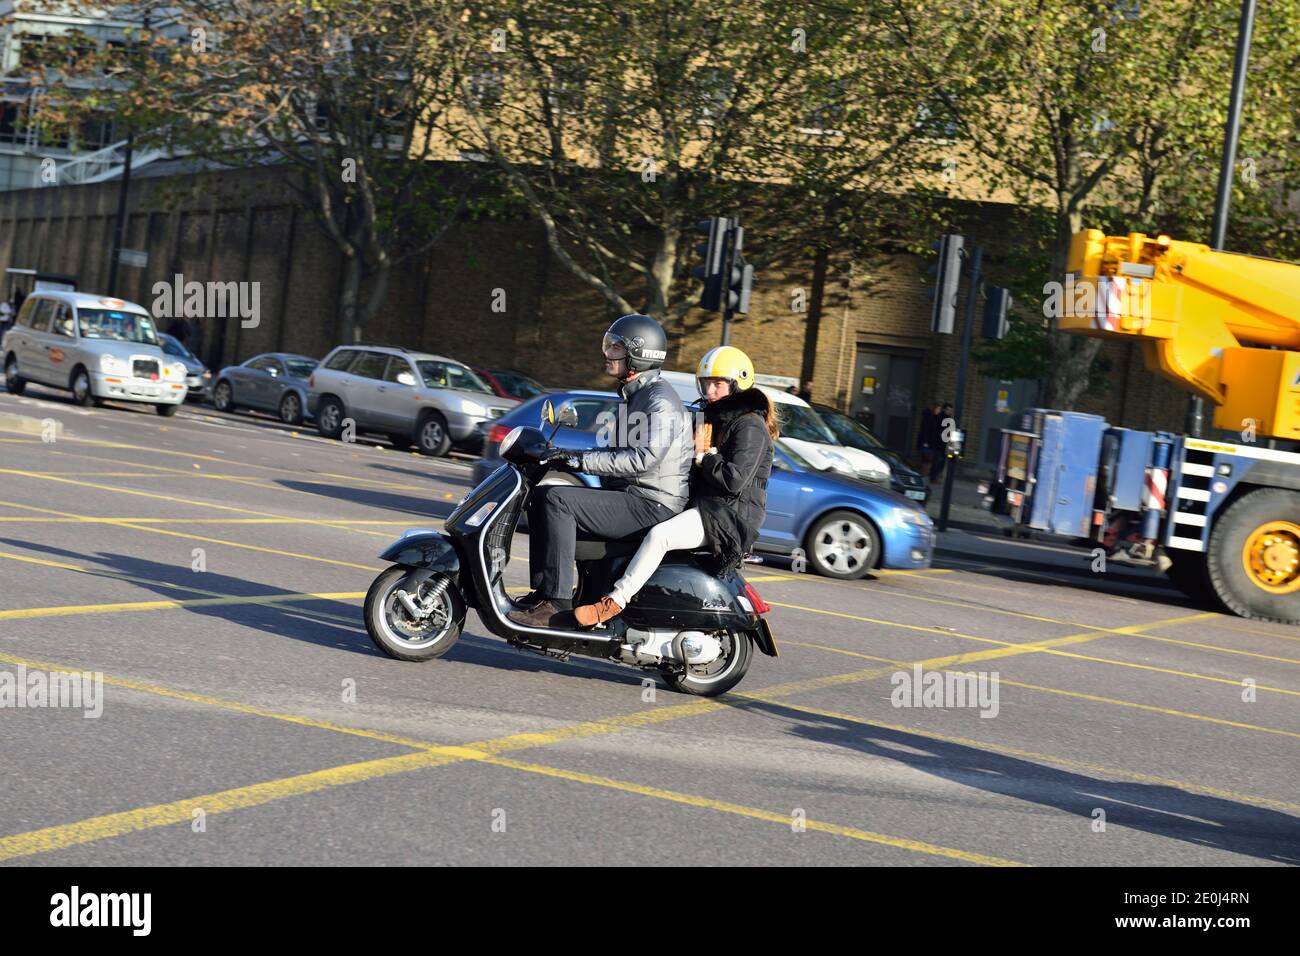 Vespa scooter rider with pillion passenger, Tower Hill, London, United Kingdom Stock Photo